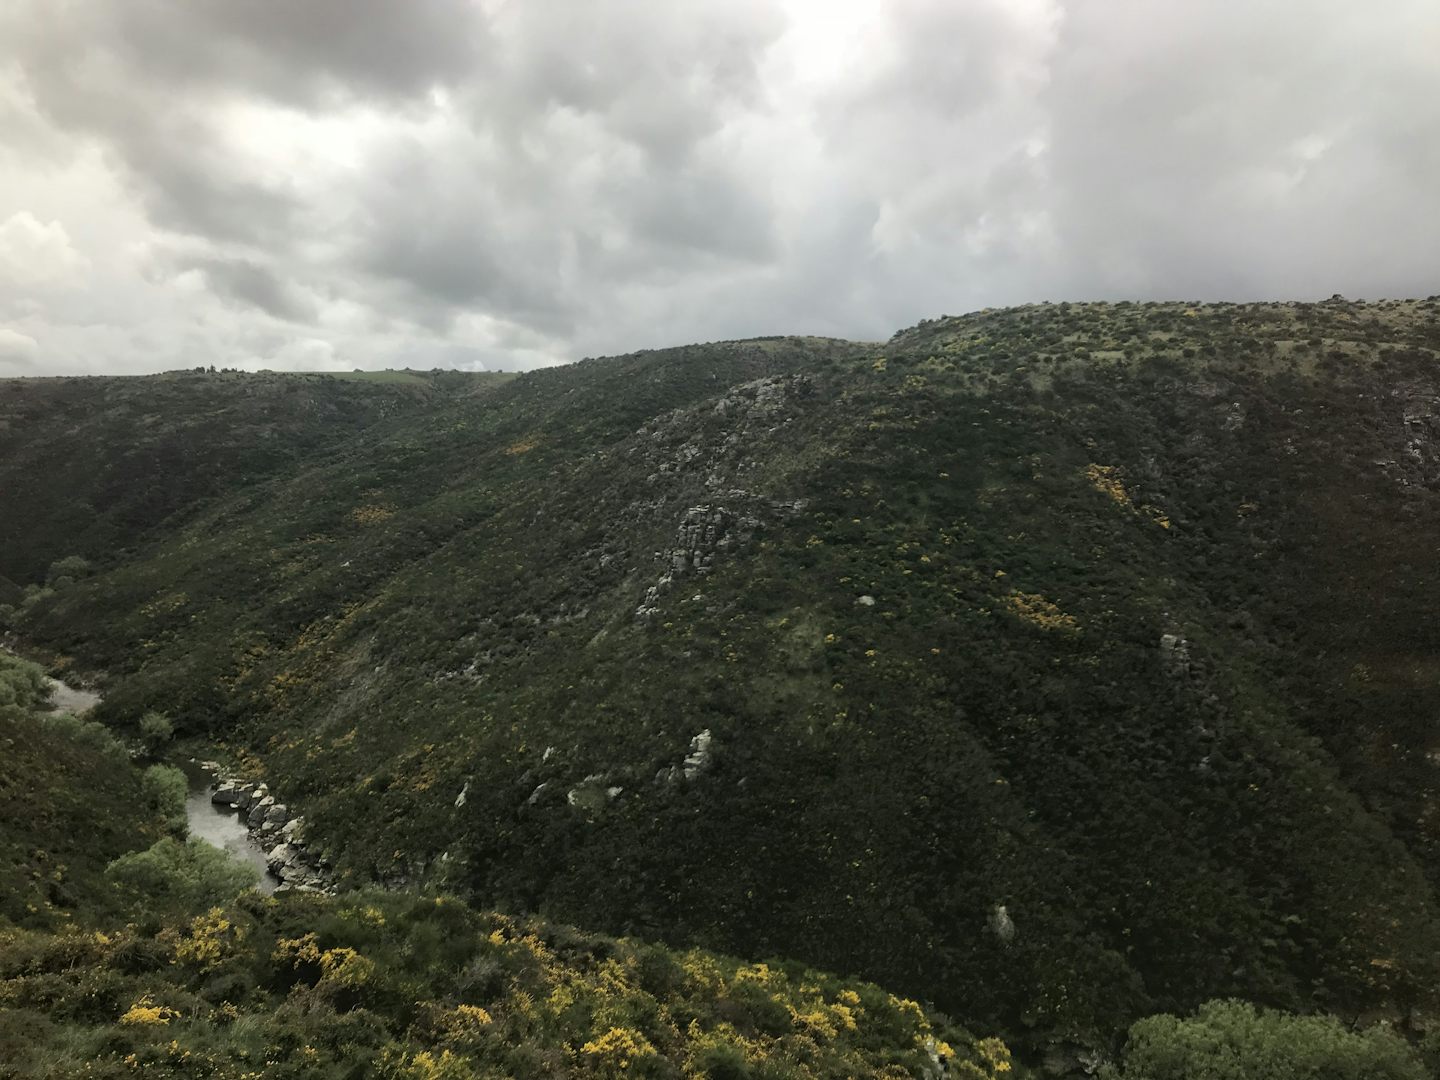 It rained in Dunedin so view of the gorge from the train were not very good